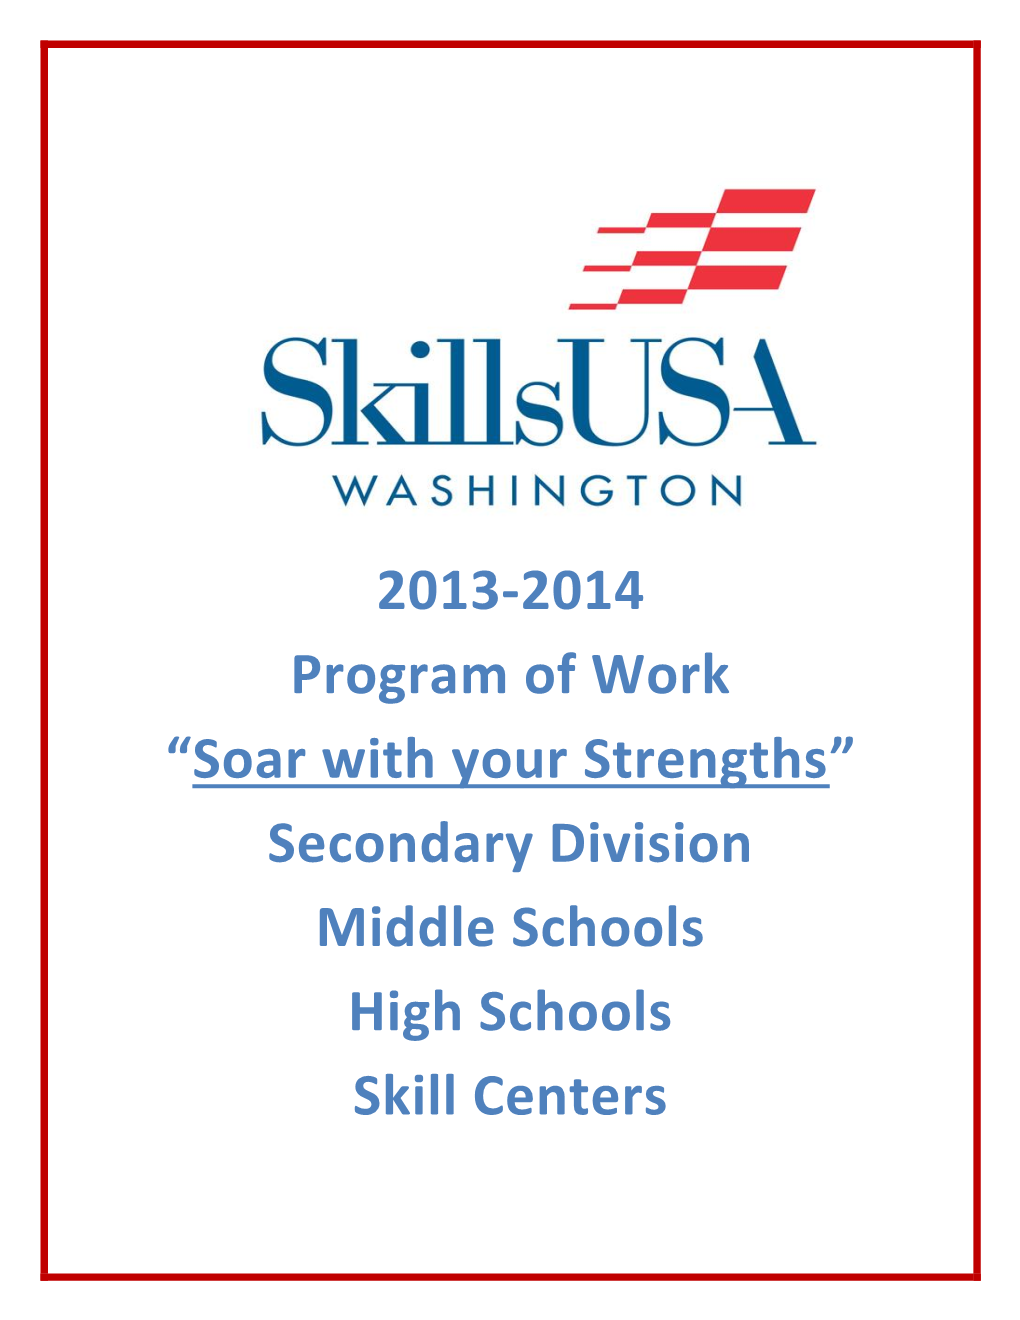 2013-2014 Program of Work “Soar with Your Strengths” Secondary